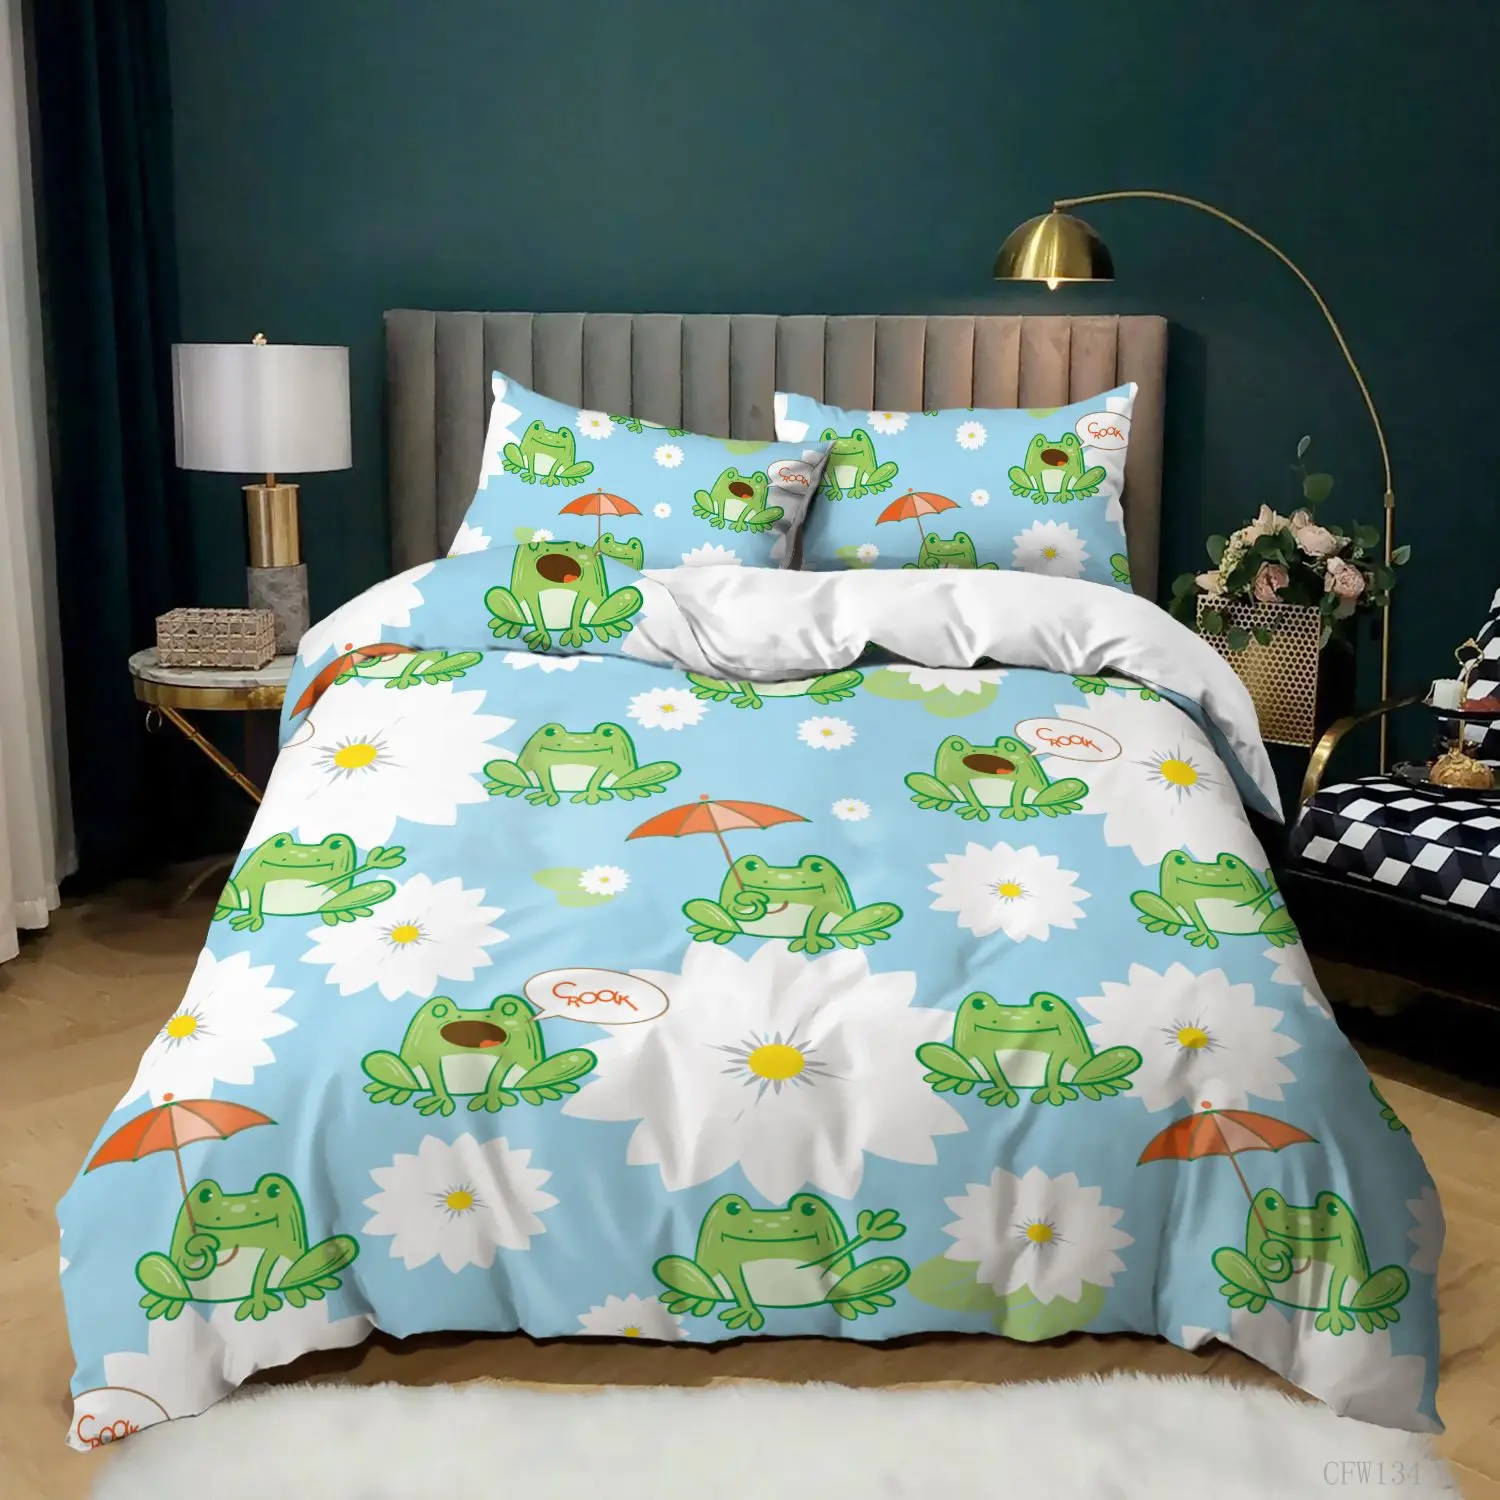 Kids Cartoon Bedding Set Cute Frog Comforter Cover Set Animal Duvet Cover Set for Children Kids Twin Quilt Cover with Pillowcase